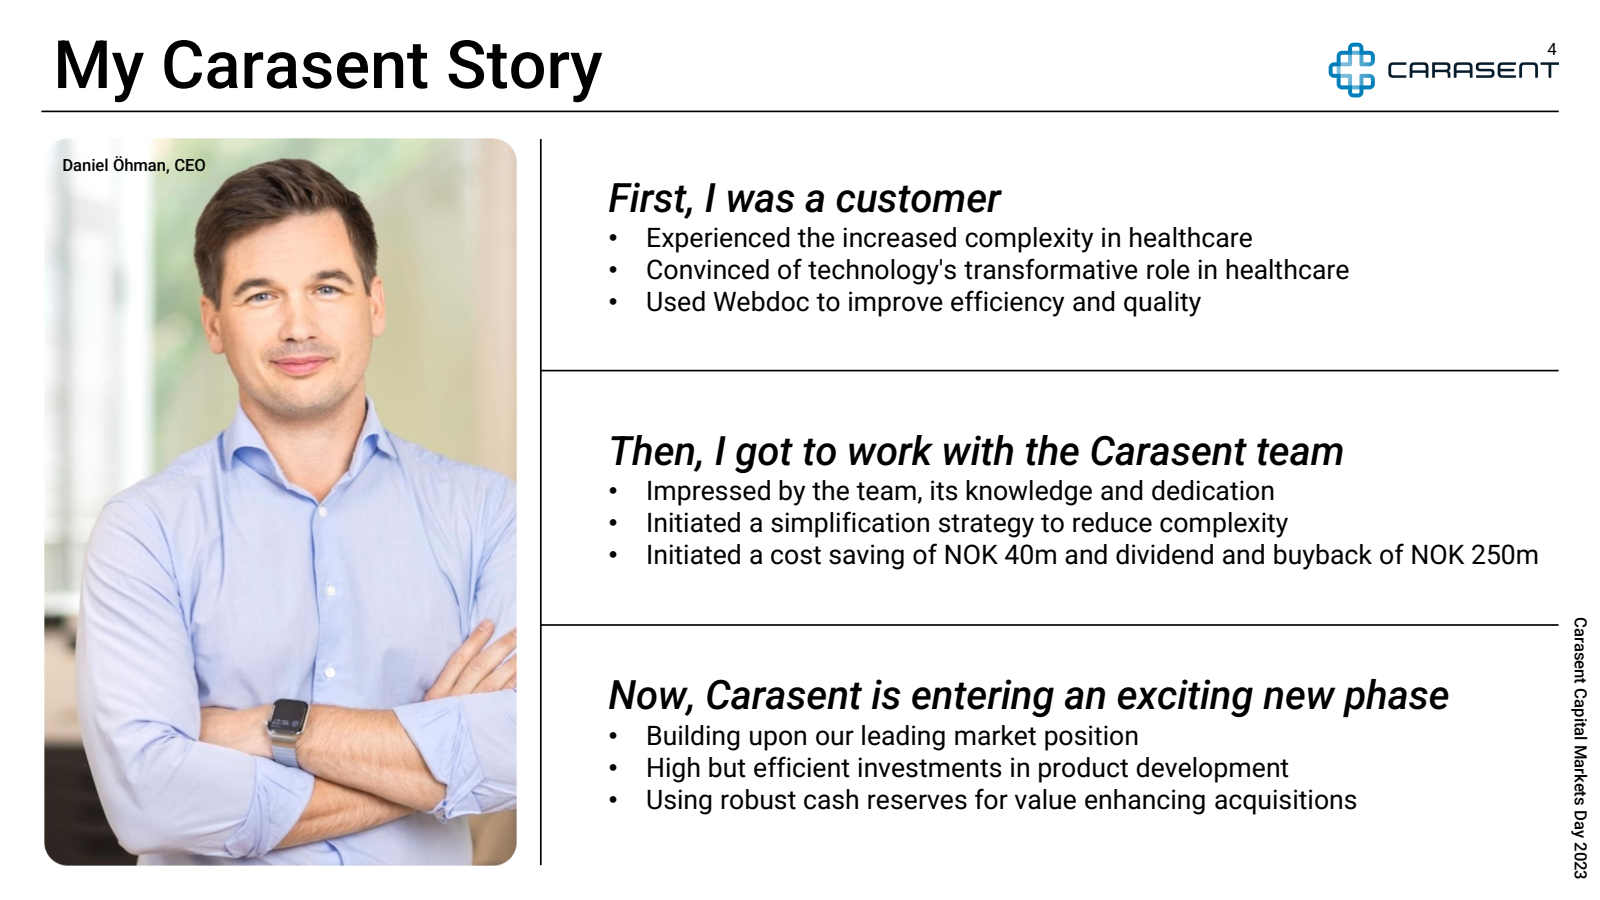 My Carasent Story 

